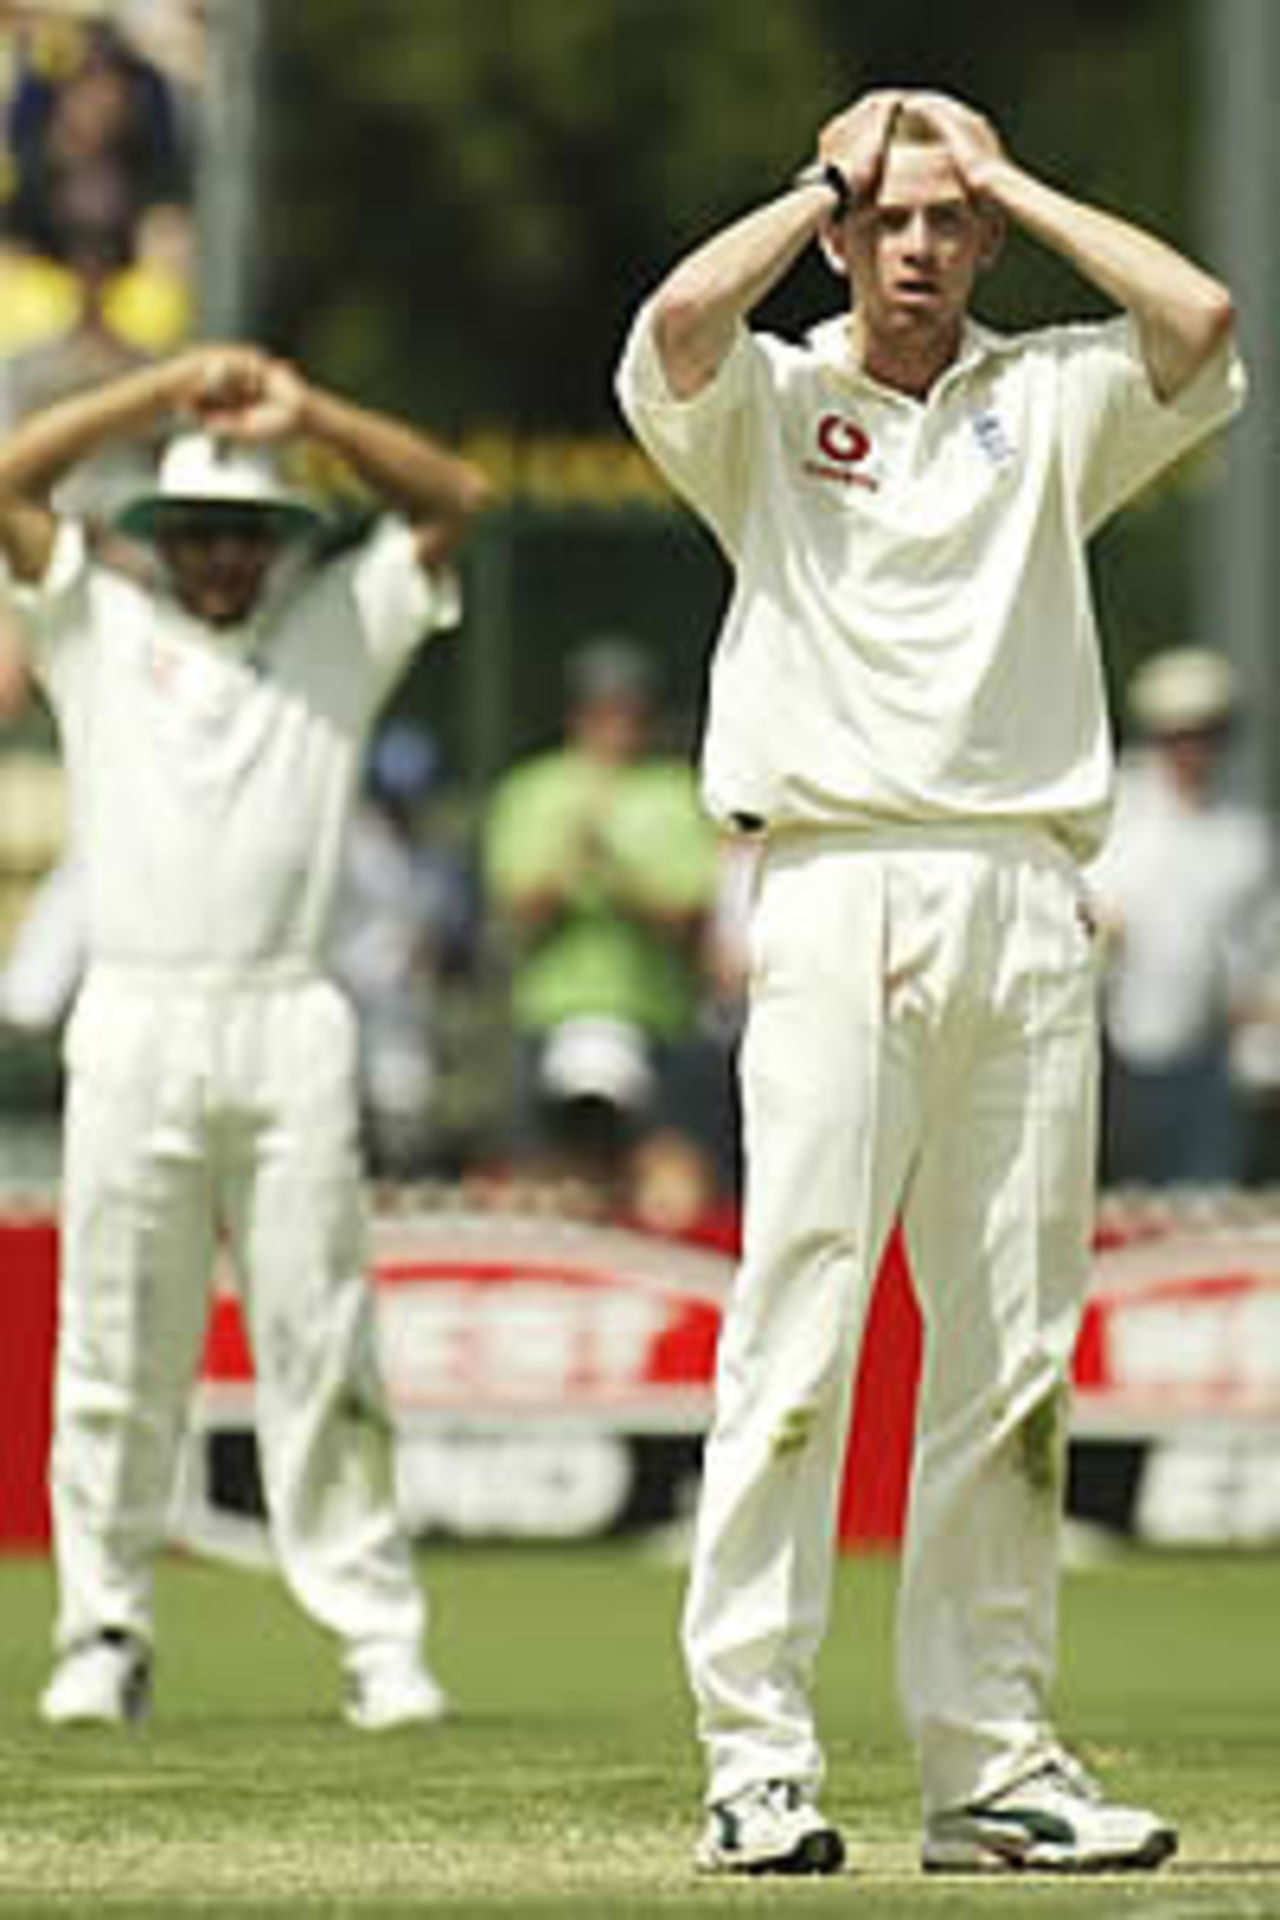 ADELAIDE- NOVEMBER 23: Richard Dawson of England watches a shot from six from Adam Gilchrist clear the boundary during the third day of the second Ashes Test between Australia and England played at Adelaide Oval in Adelaide, Australia, on November 23, 2002.